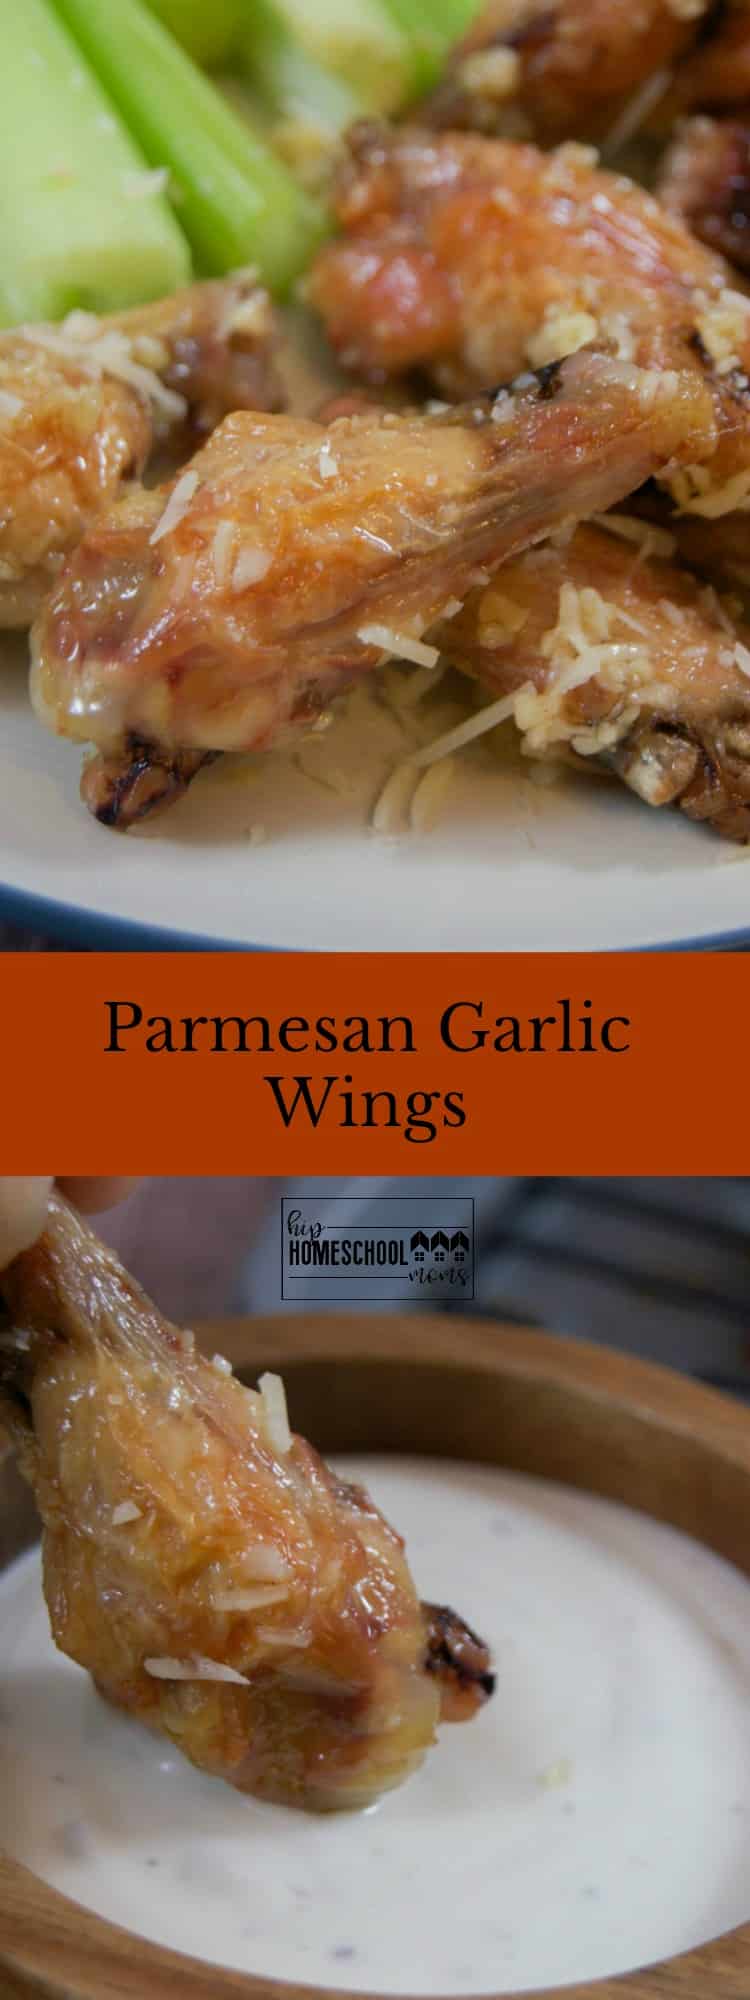 Picture and recipe for Parmesan Garlic Wings |Hip Homeschool Moms